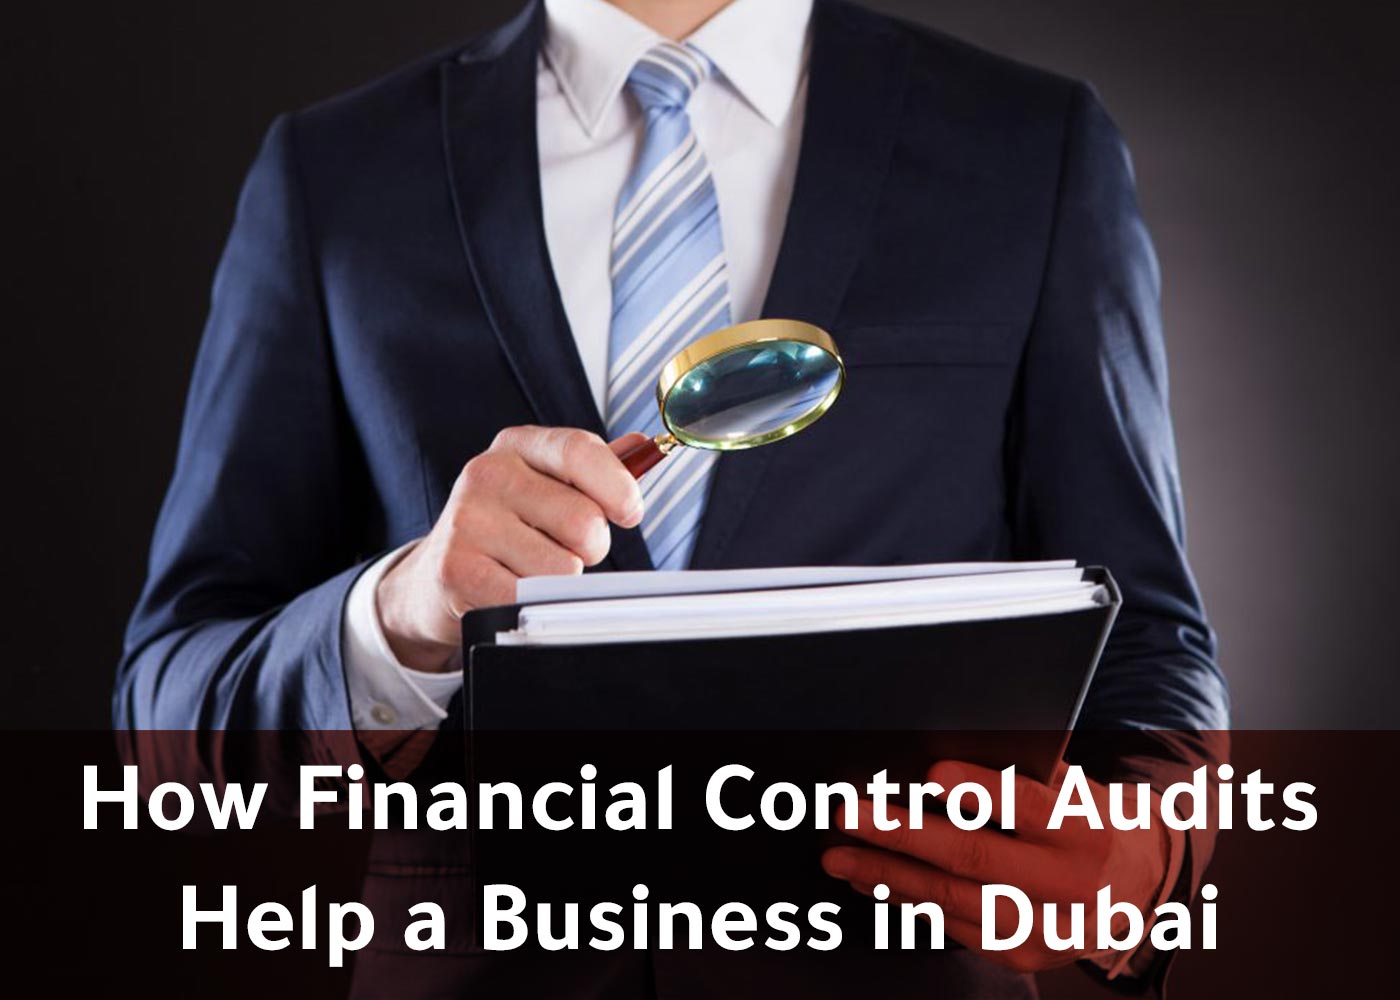 How Financial Control Audits Help a Business in Dubai